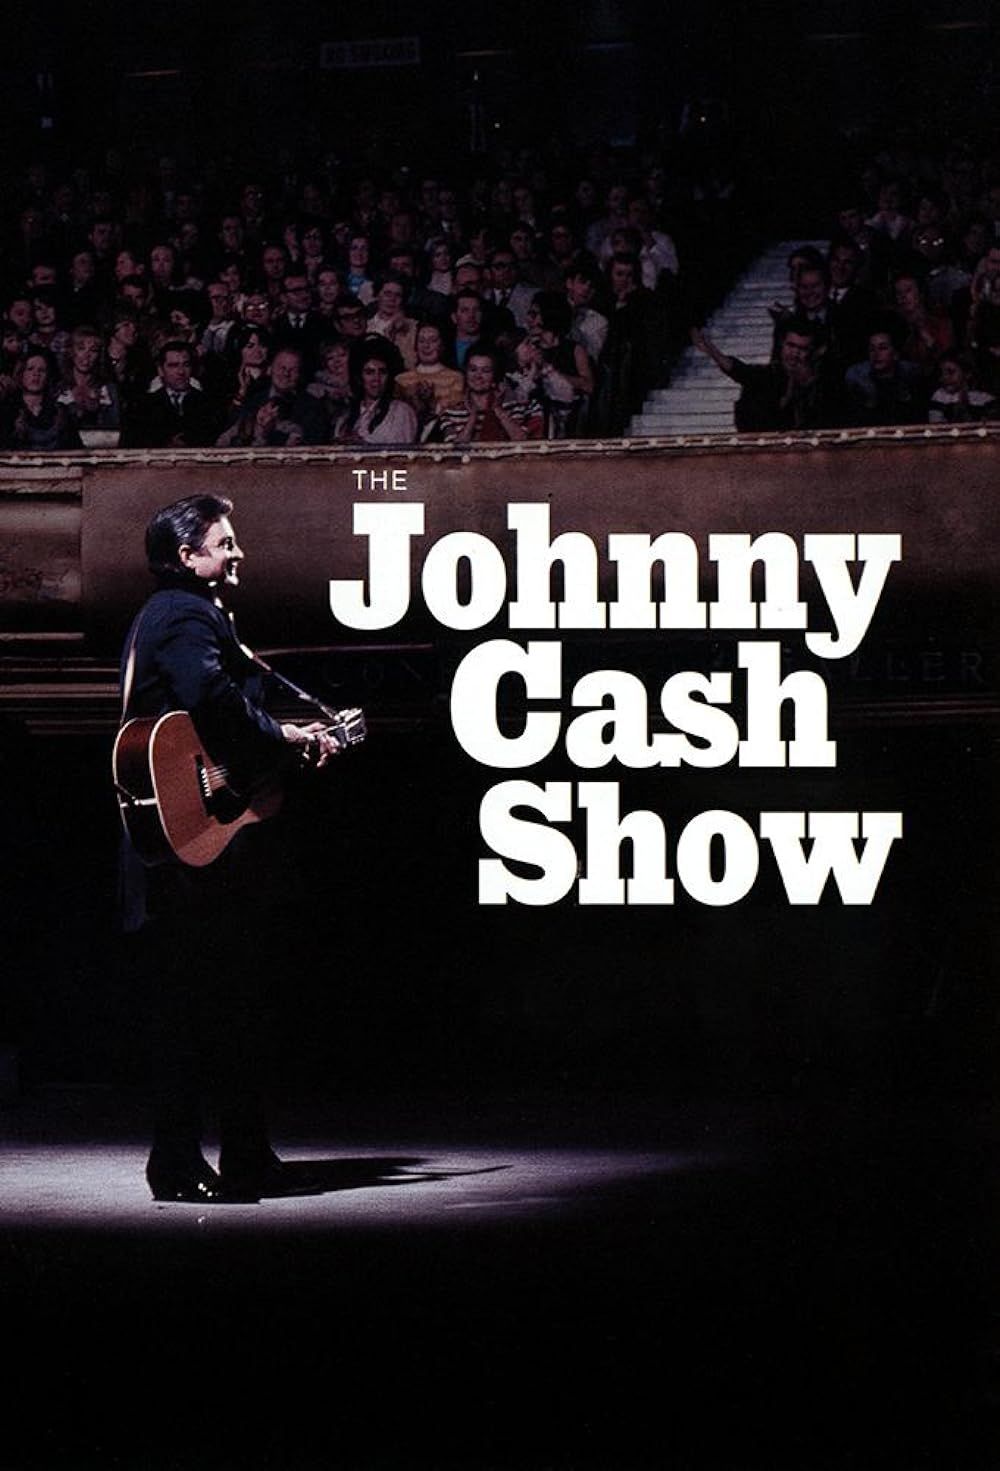 A Recreation of the Johnny Cash TV Show